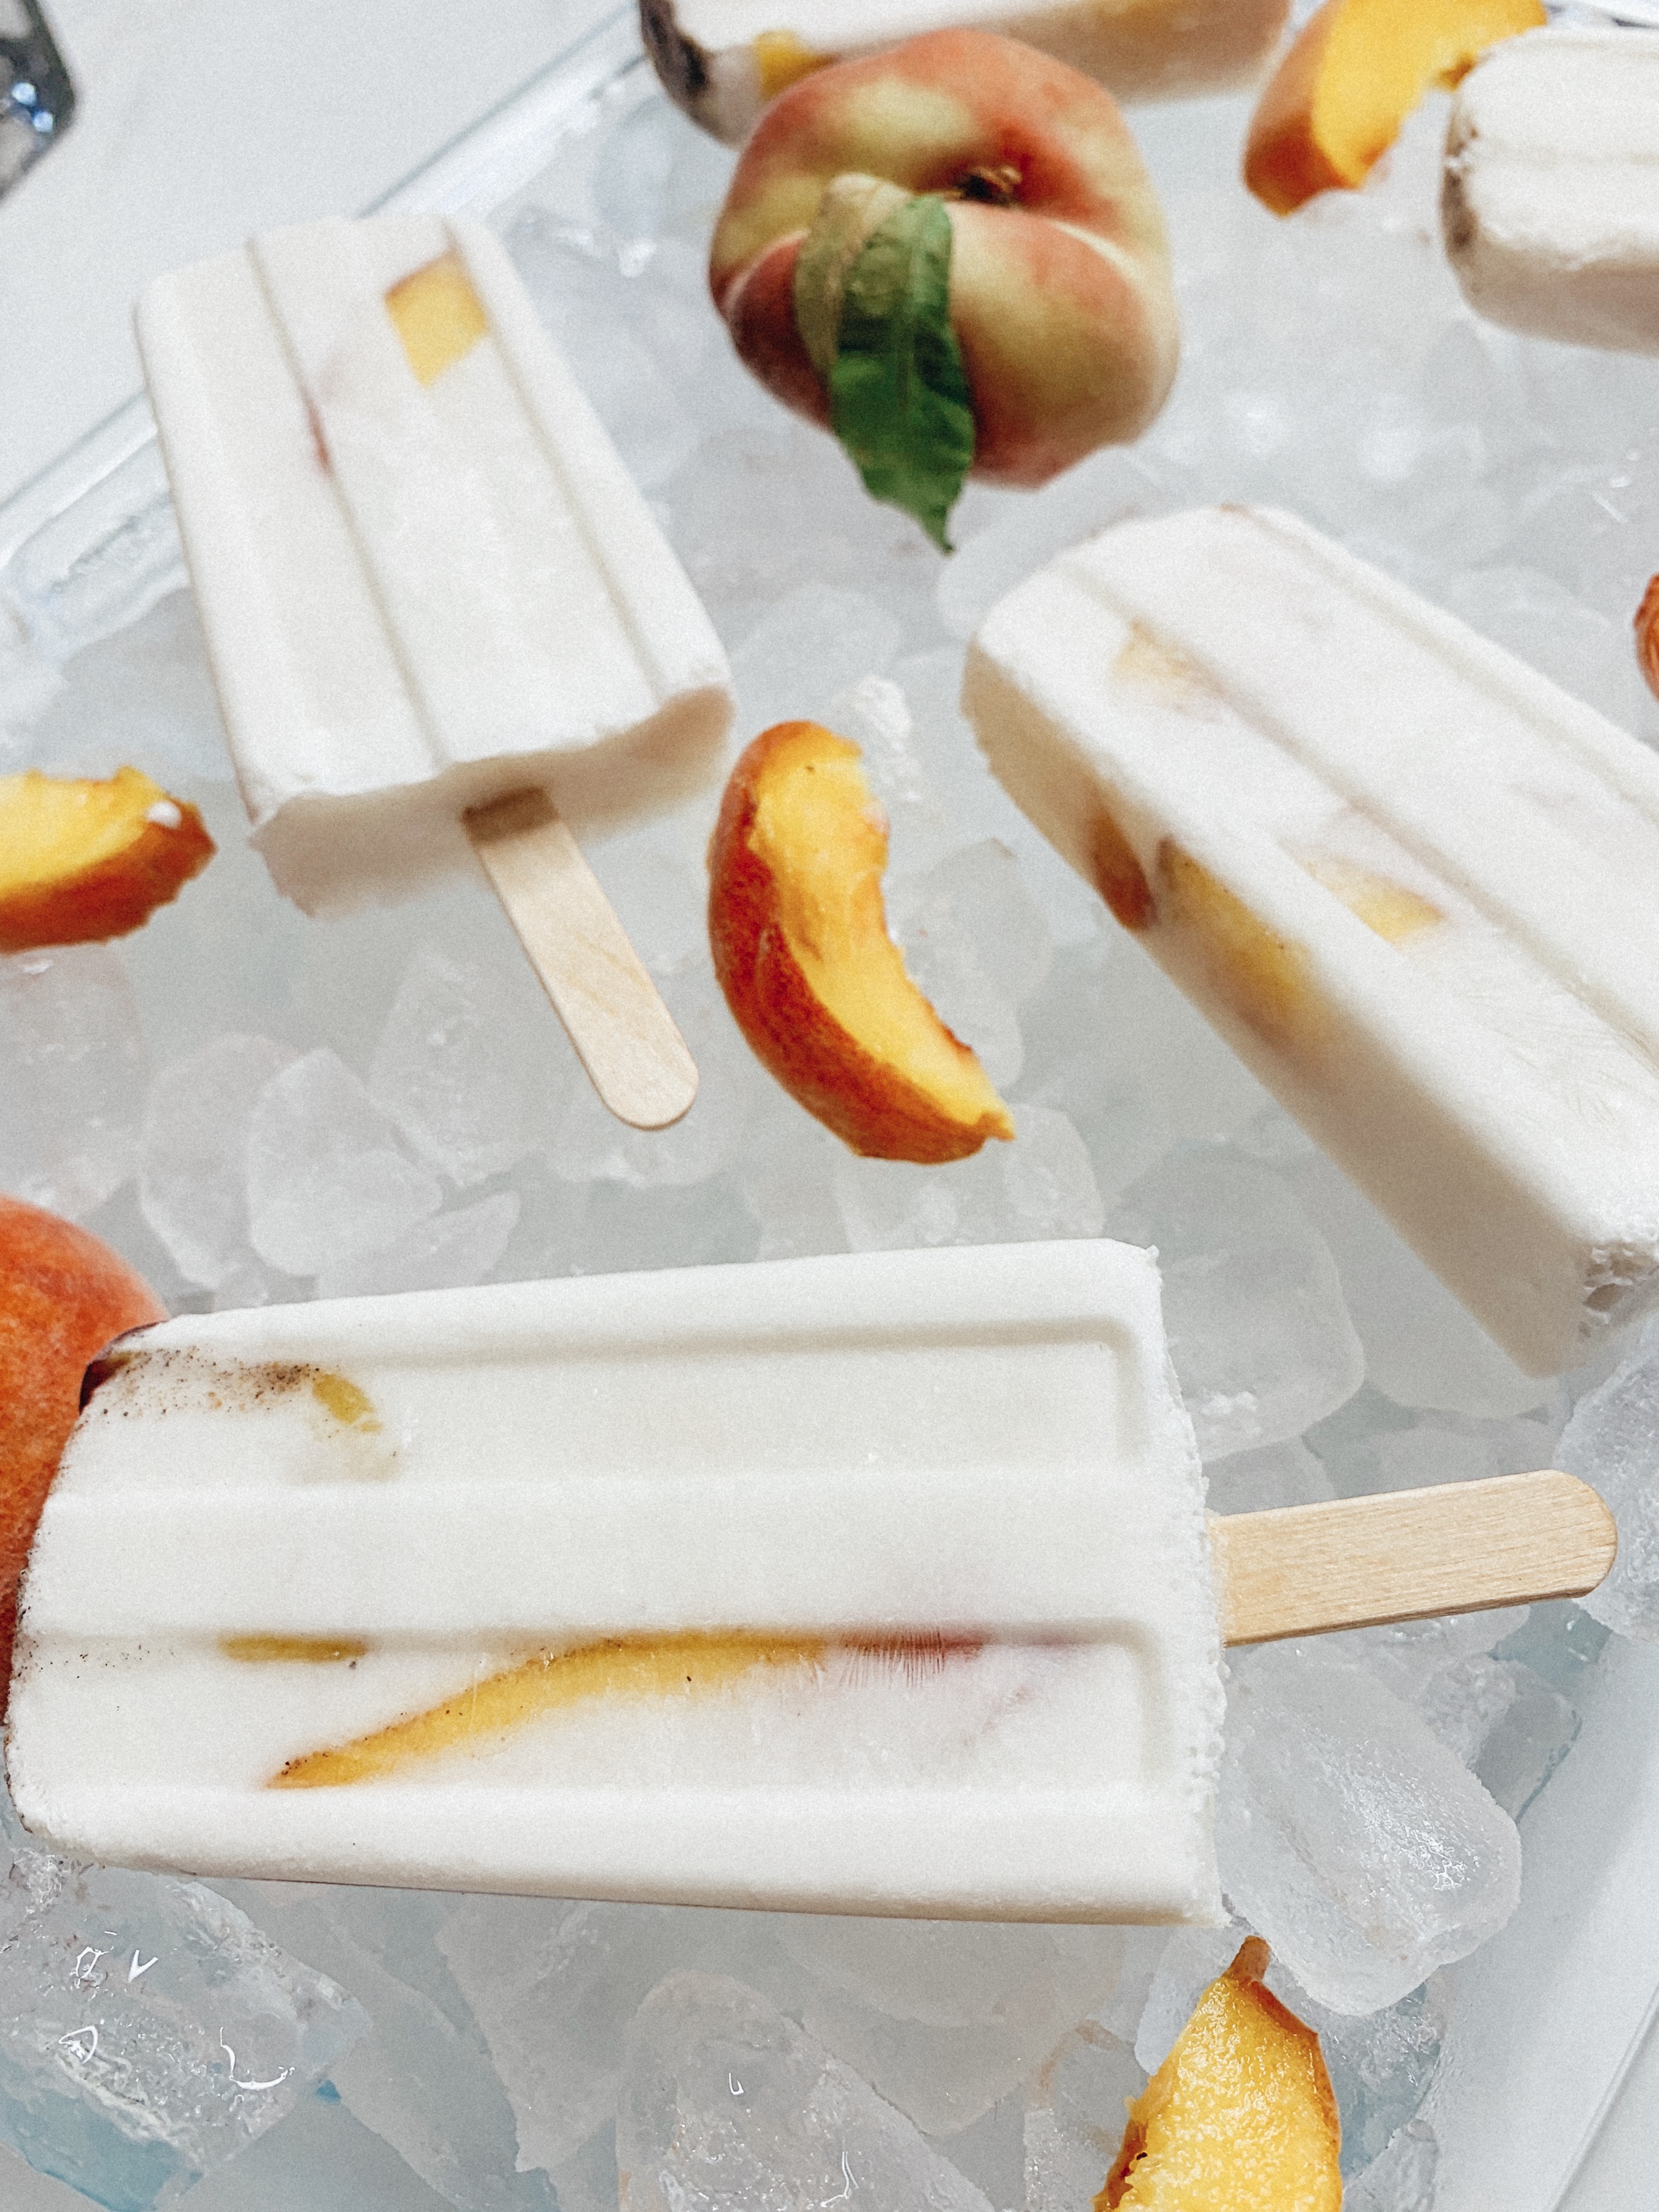 Be The Best Guest - Show Up With These Peach Coconut Ice pops! #icepops #bestguest #dessert #icecream #recipe #healthydessert #food #foodie #eats #peach #coconut #icepop closeup